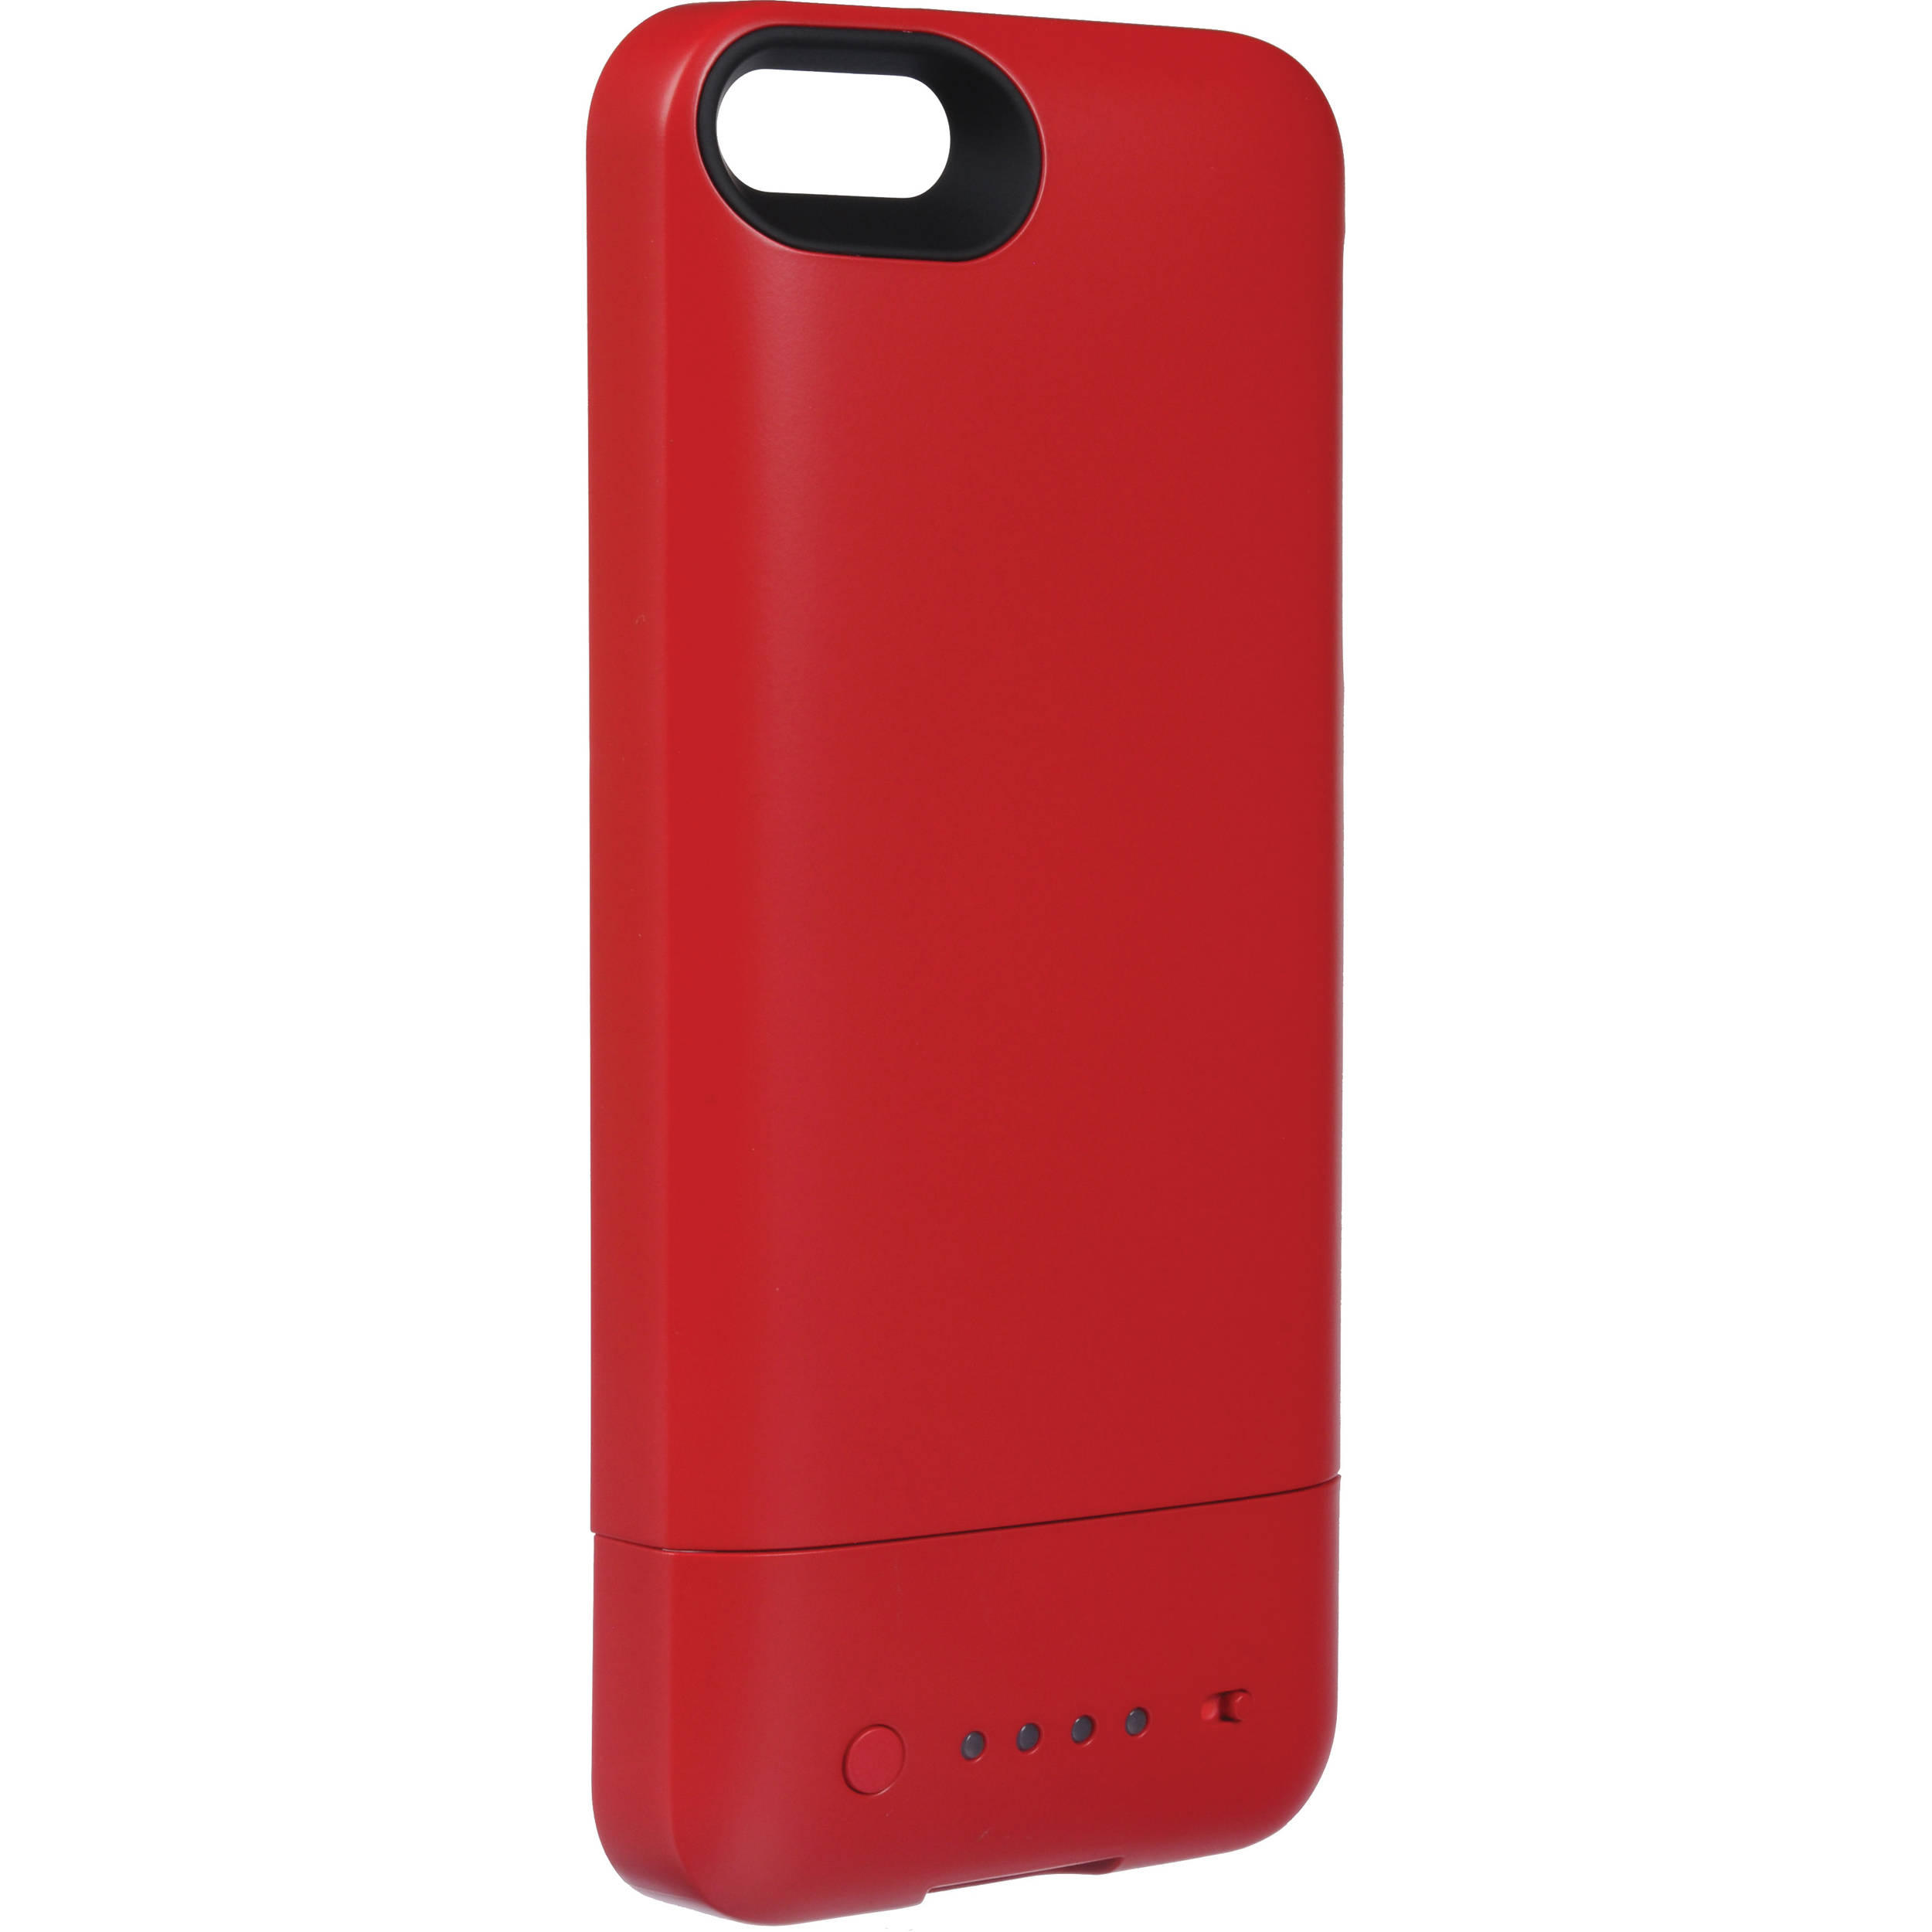 MOPHIE RED Juice Pack Helium iPhone 5